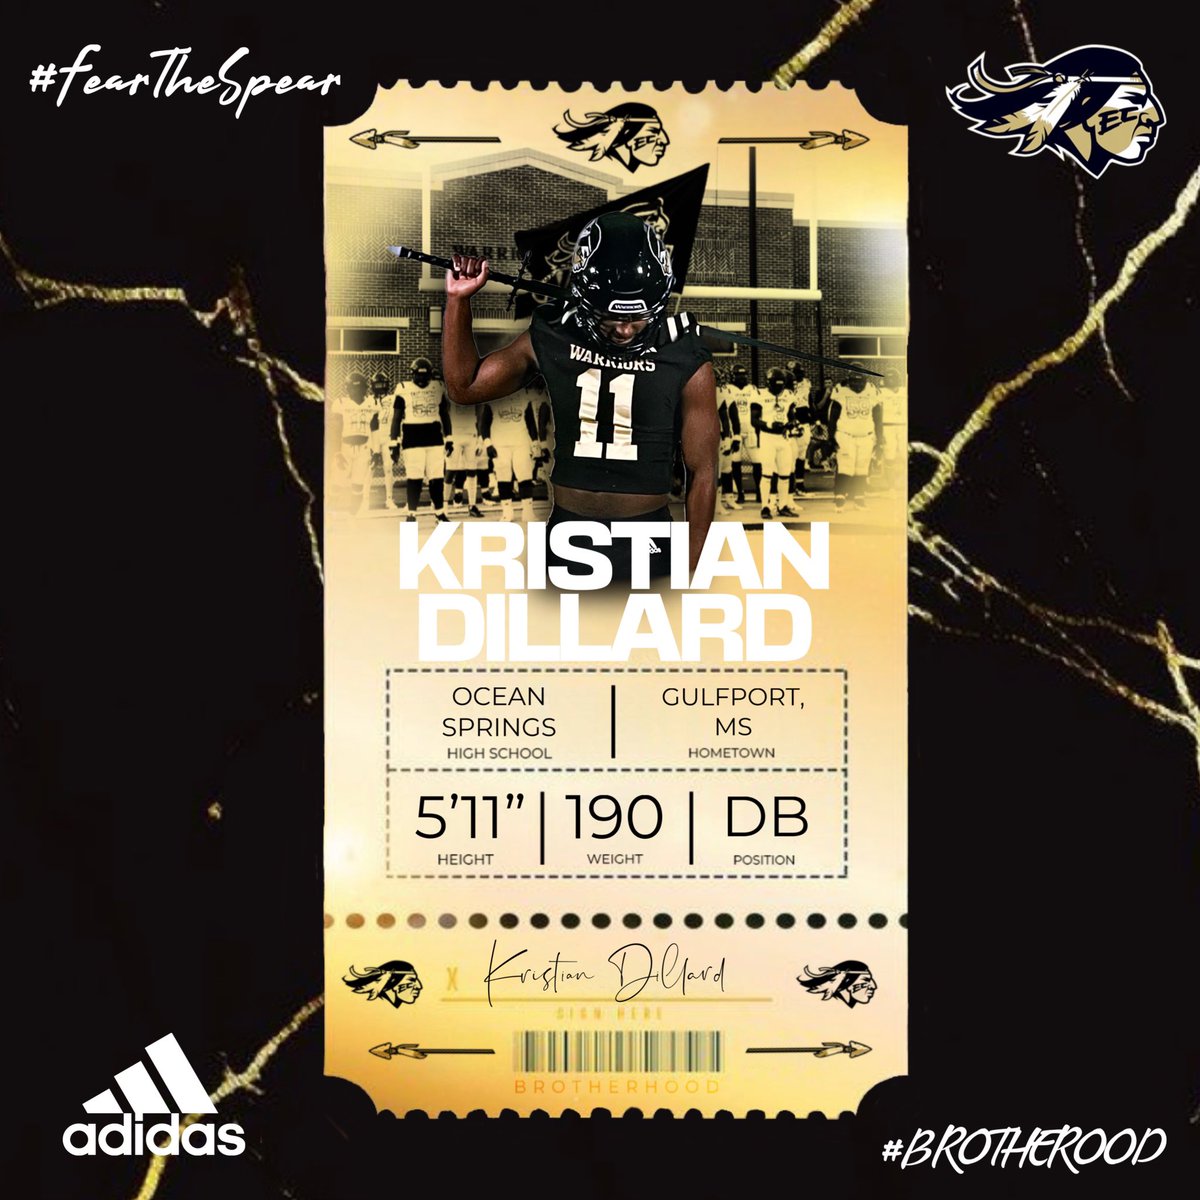 LOCK DOWN DB from Ocean Springs!! @DillardKristian has punched his ticket to join the Brotherhood!! #BROTHERHOOD X #FearTheSpear